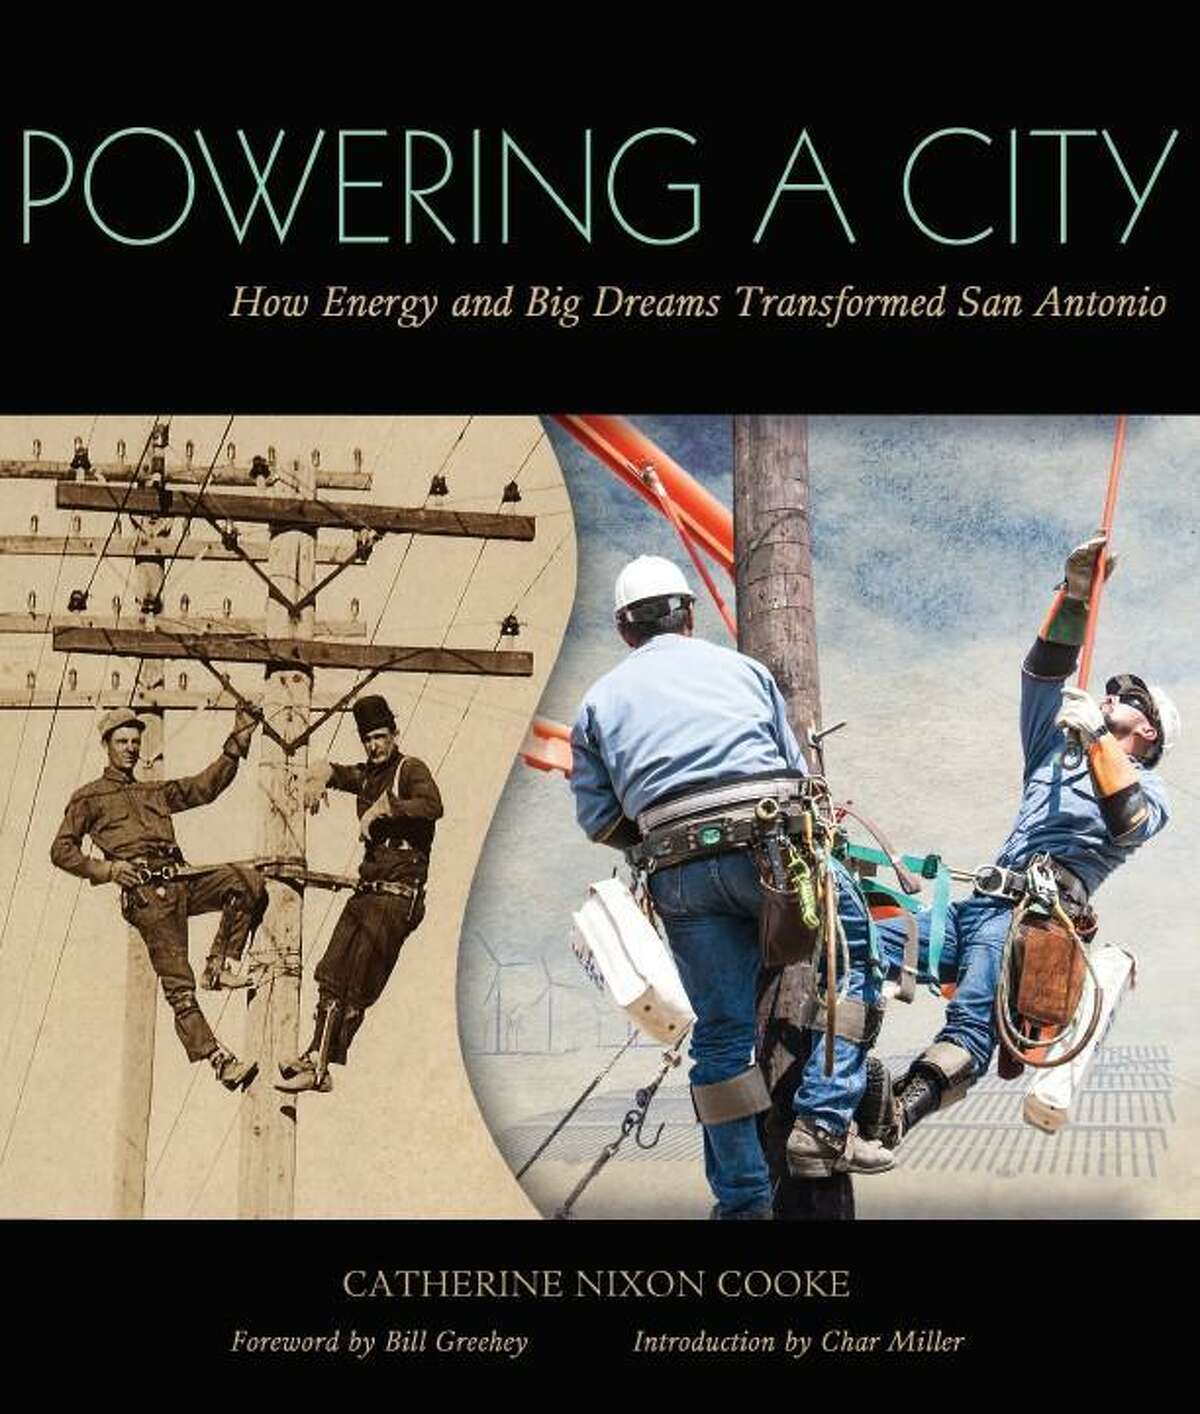 “Powering a City: How Energy and Big Dreams Transformed San Antonio” by Catherine Nixon Cooke